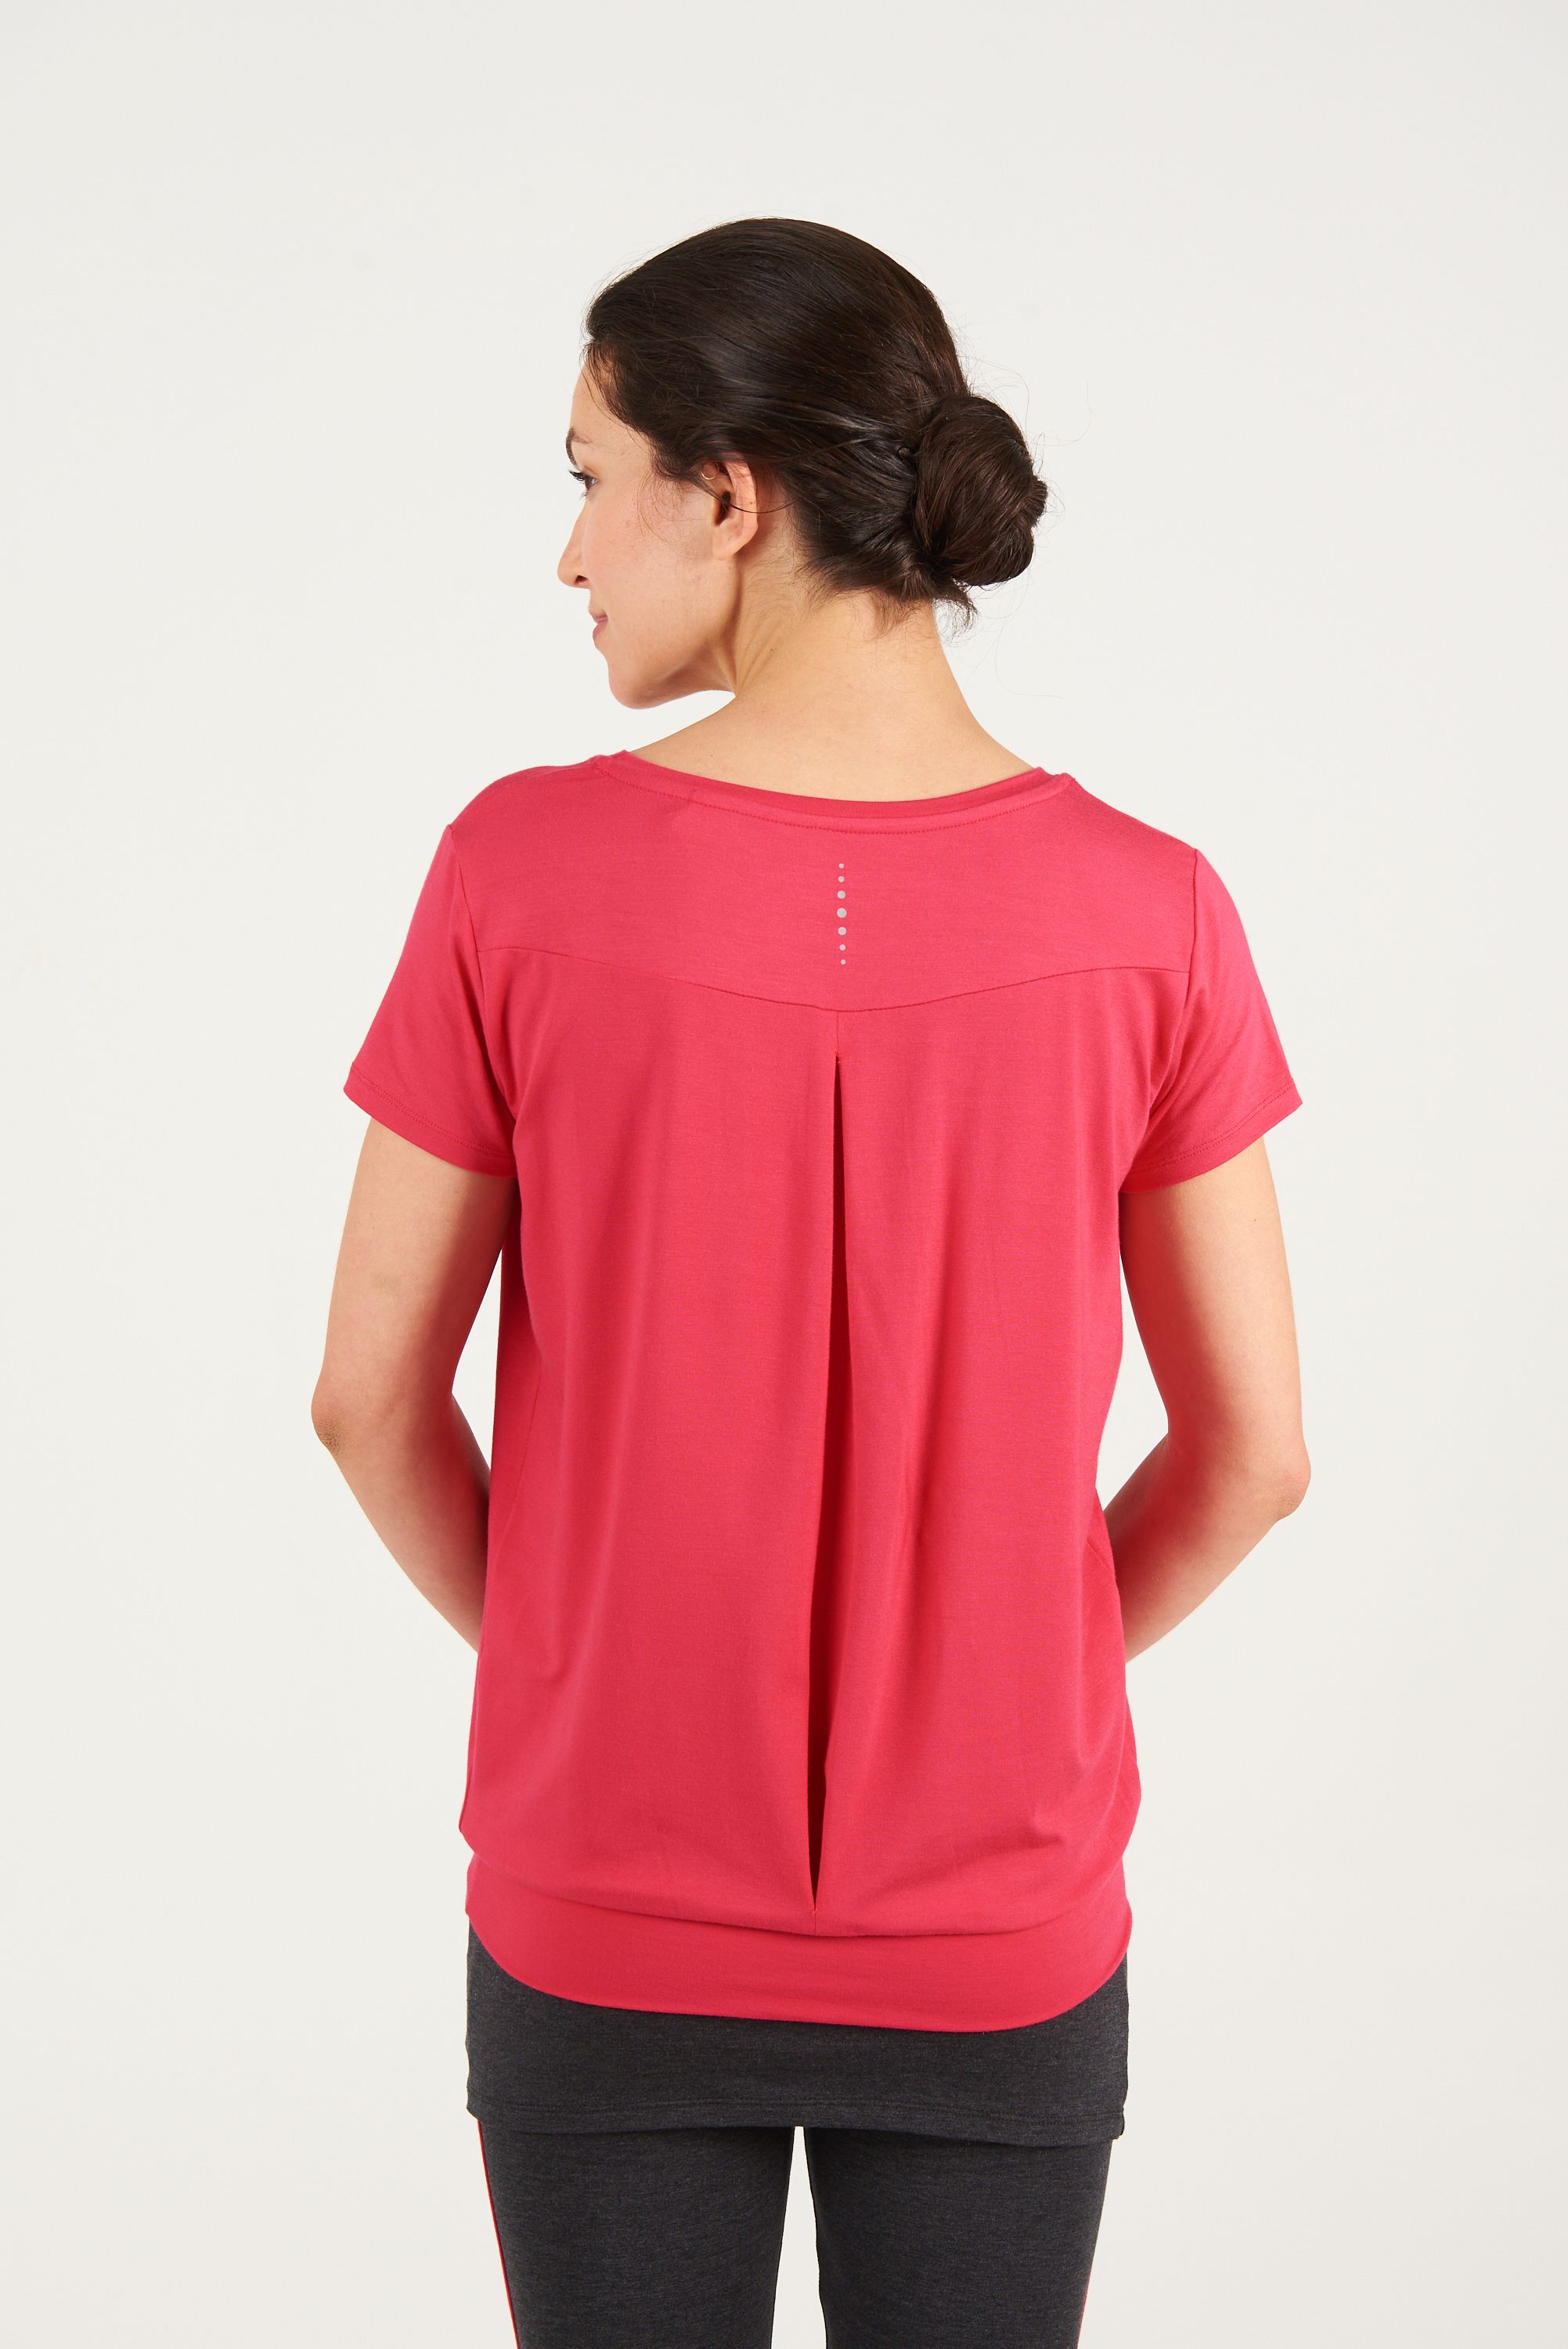  Asquith Smooth You Tee - Cherry Pink